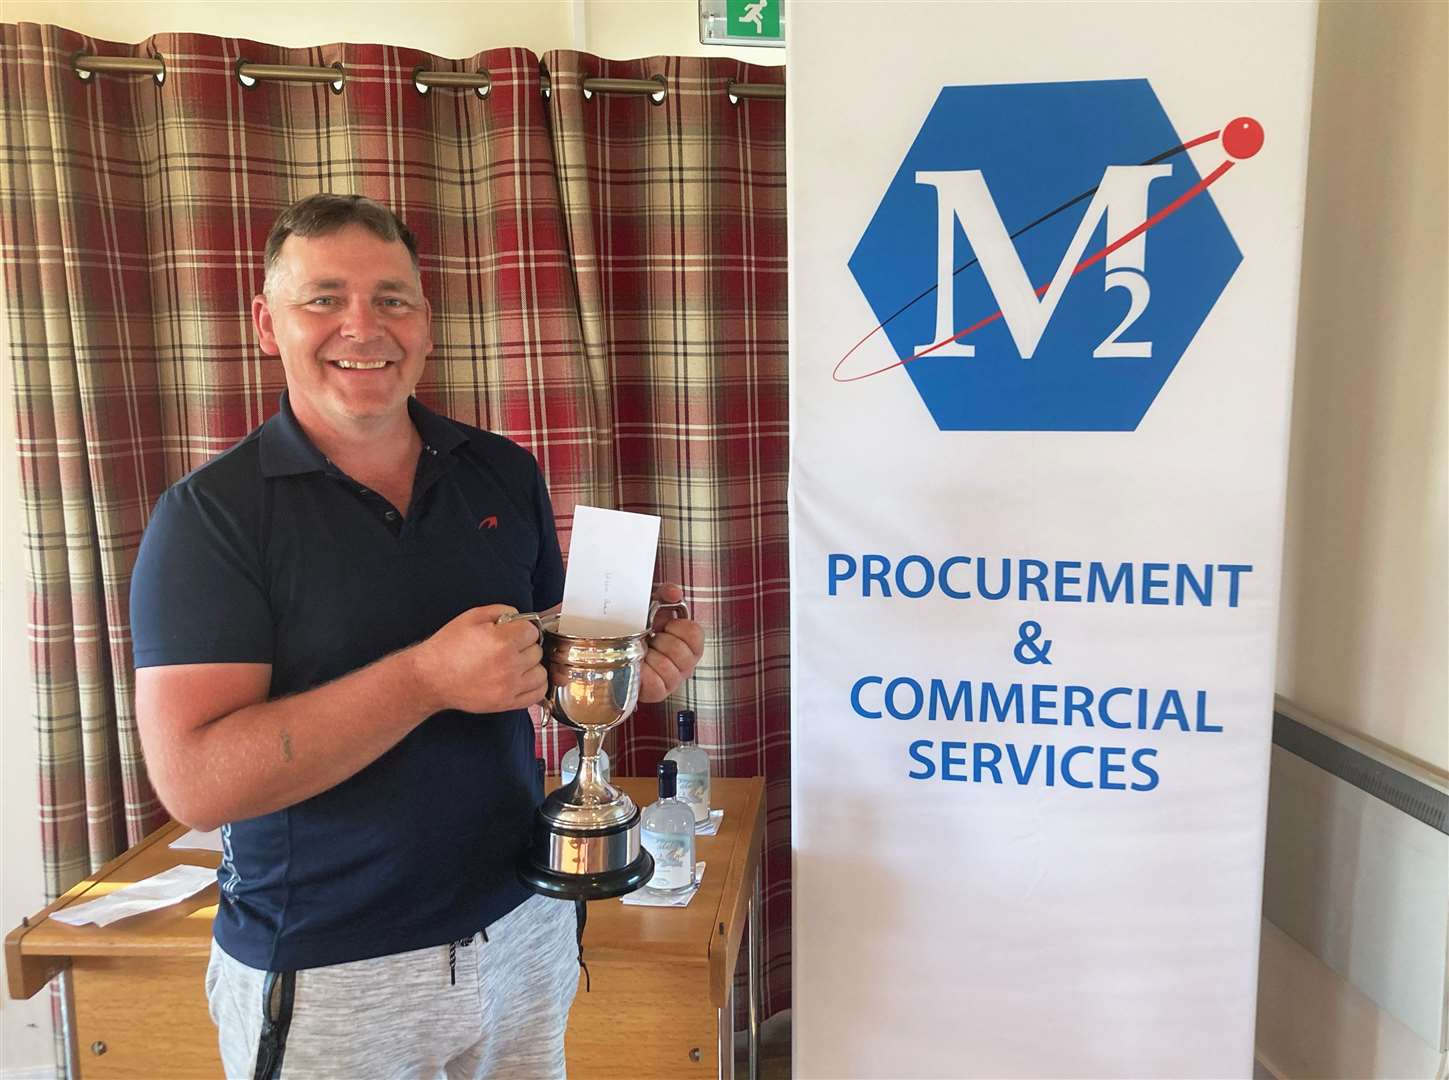 Willie Paton, winner of the handicap prize in the Reay Open sponsored by M2 Procurement and Commercial Services.